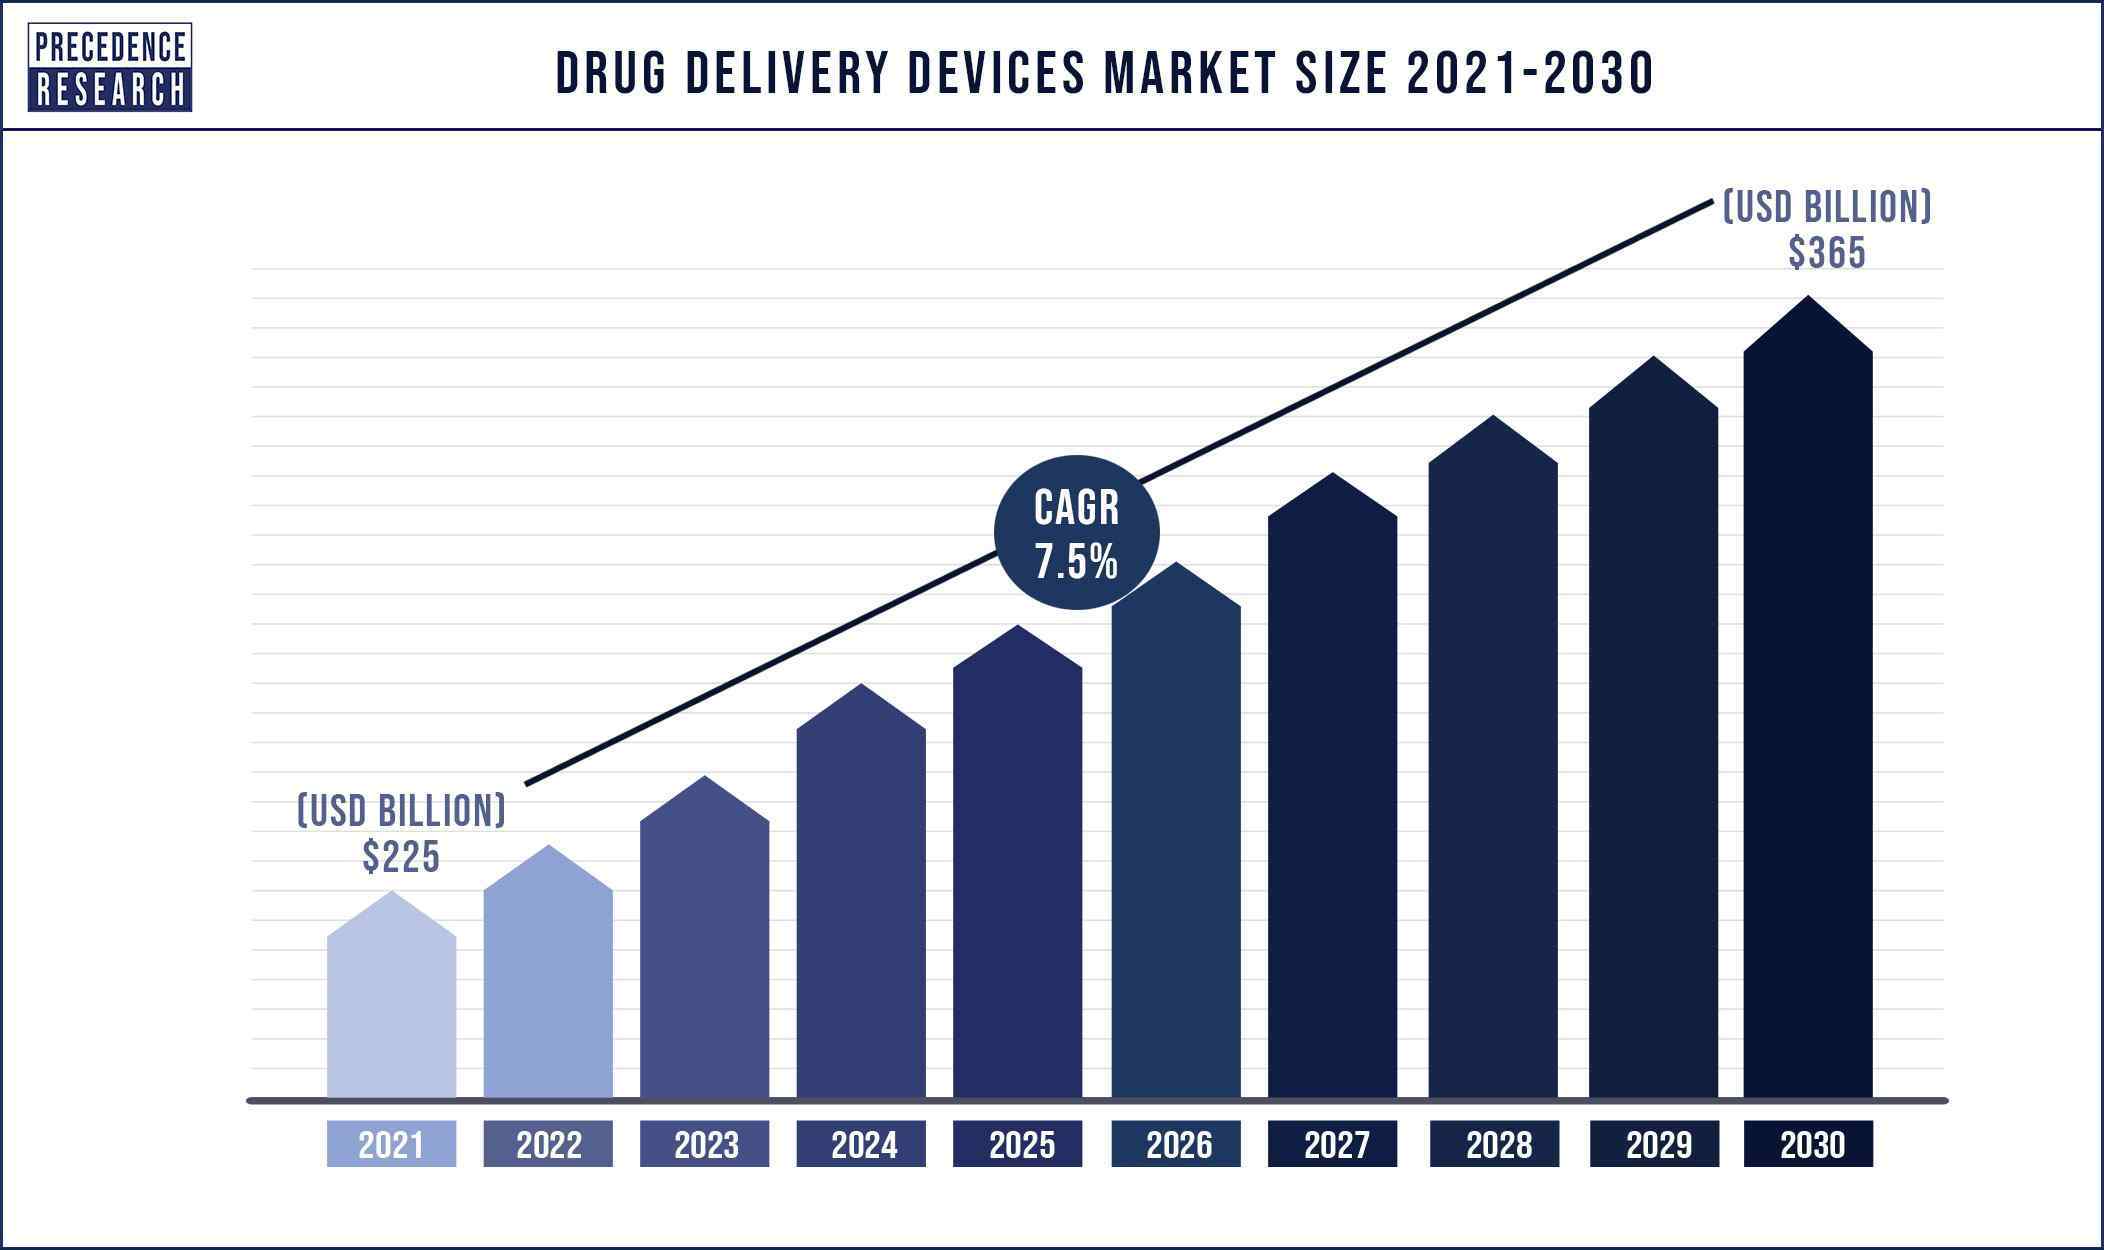 Drug Delivery Devices Market Size 2021 to 2030